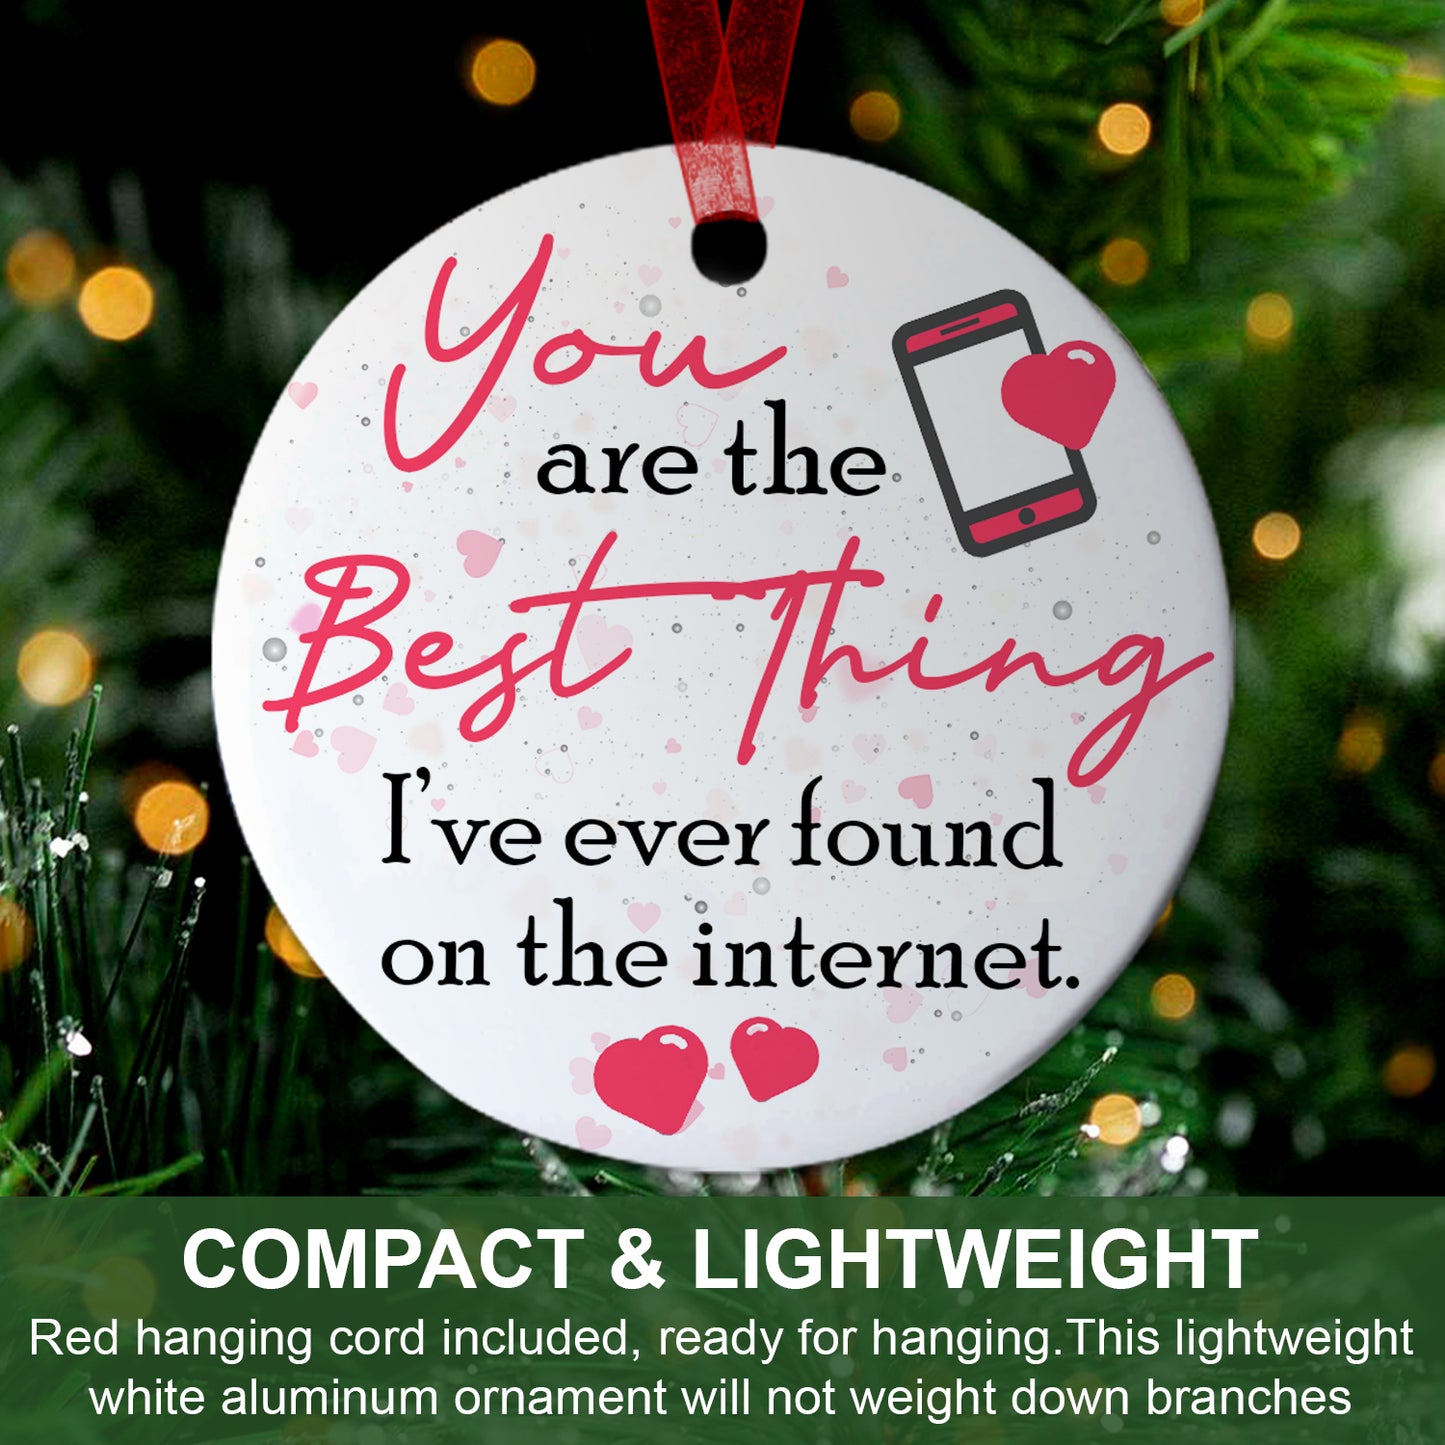 Dating Online Ornament You Are The Best Thing I Found On The Internet Ornament, Gift For Couple Girlfriend Wife- Aluminum Metal Ornament- Valentine's Day Internet Dating Gift, Online Dating Present